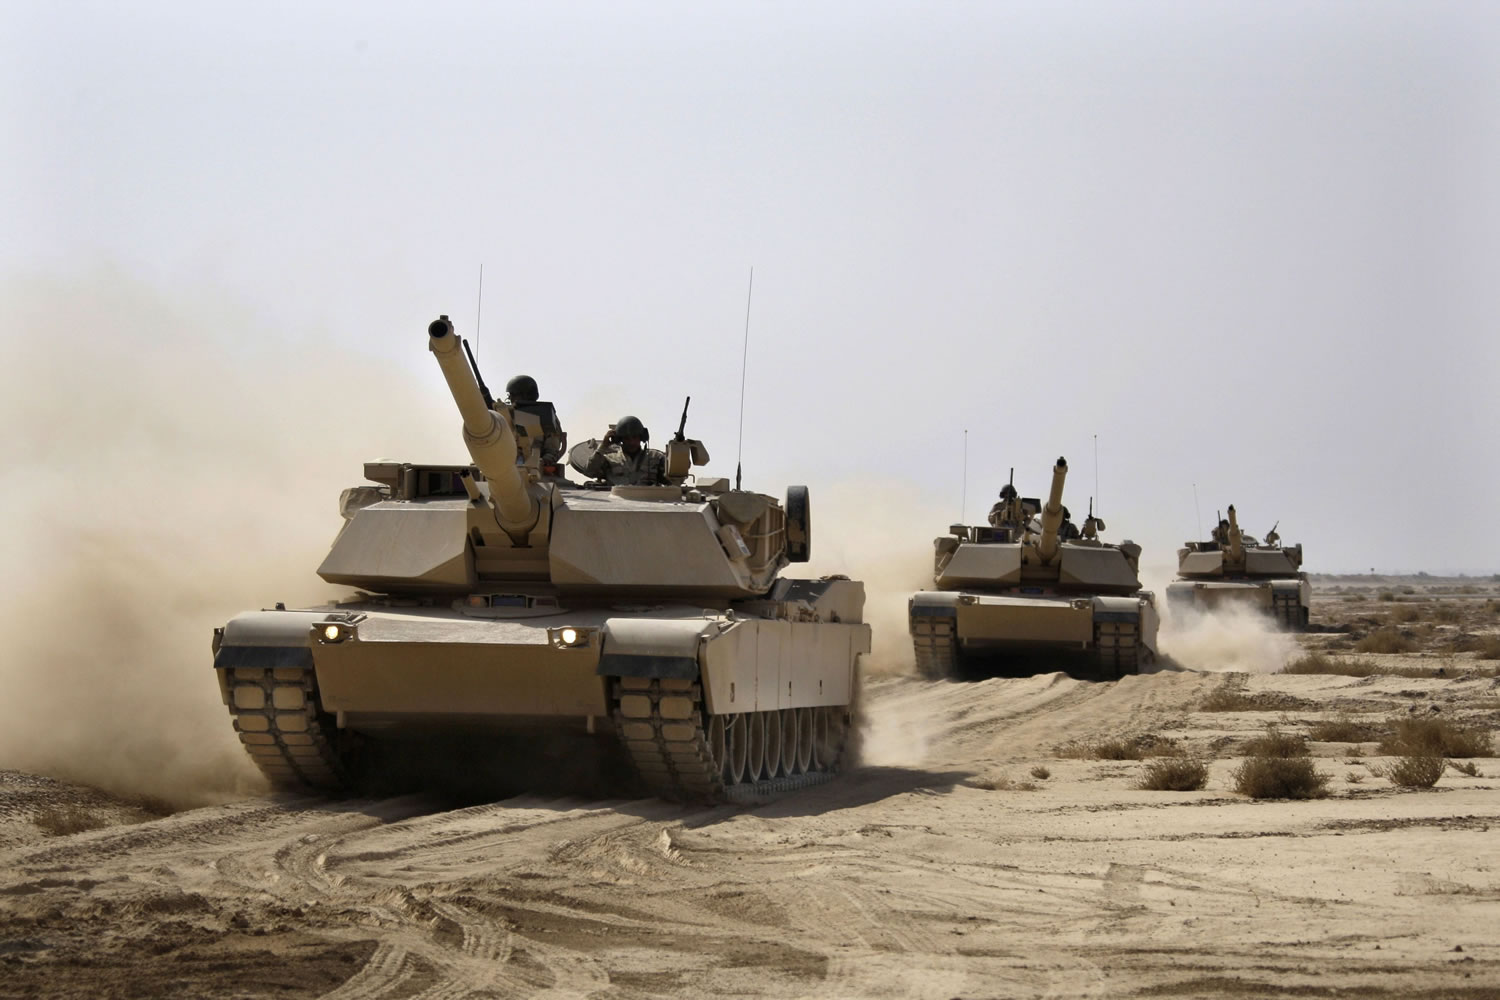 Iraqi Army M1A1 Abrams tanks, purchased from the United States, maneuver during a live-fire exercise Tuesday outside Baghdad. With the U.S.